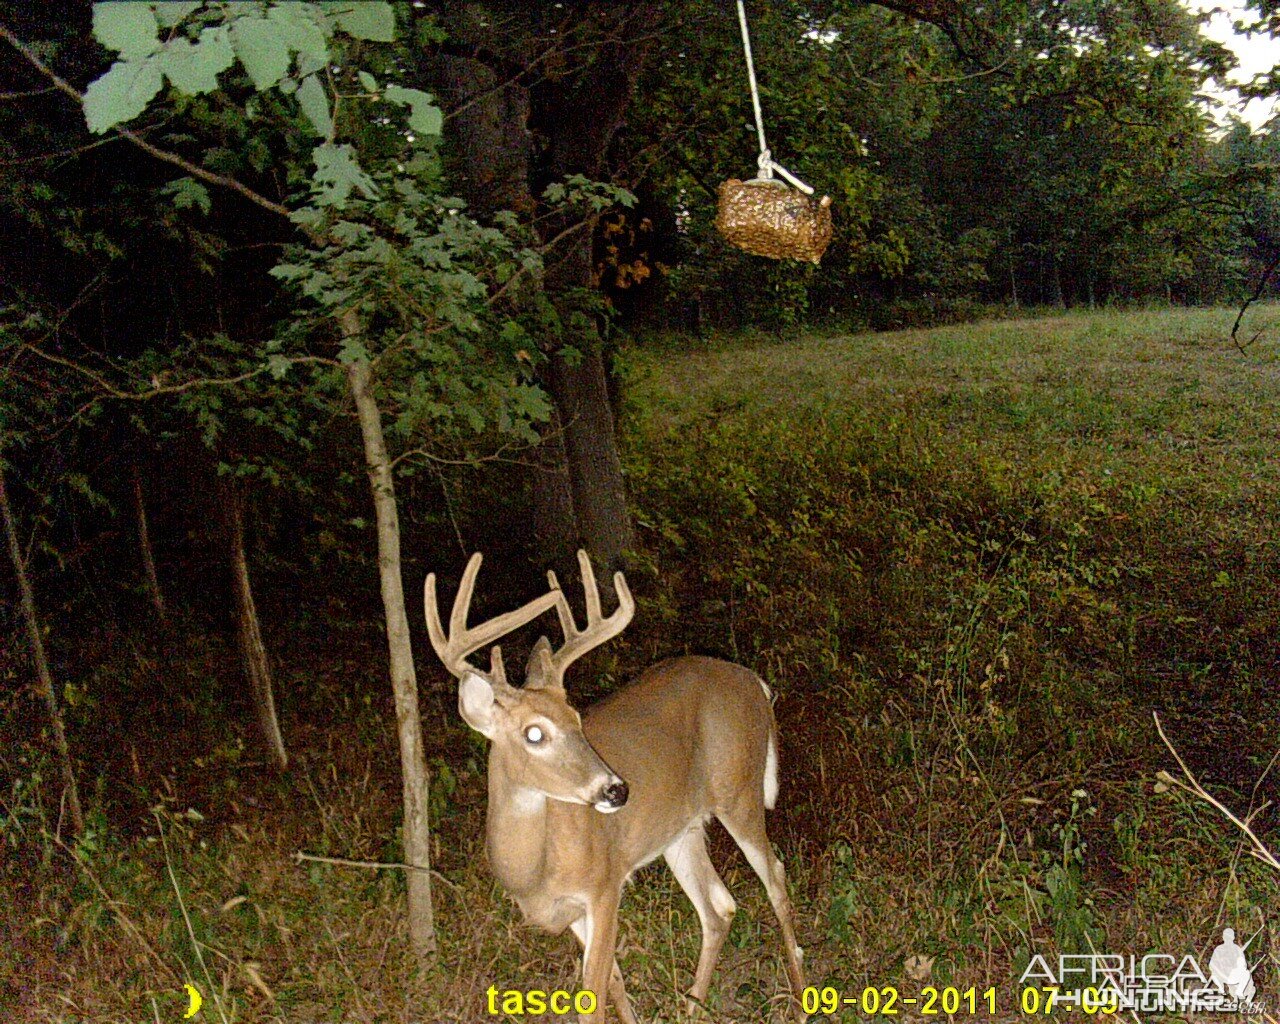 First look at a Buck